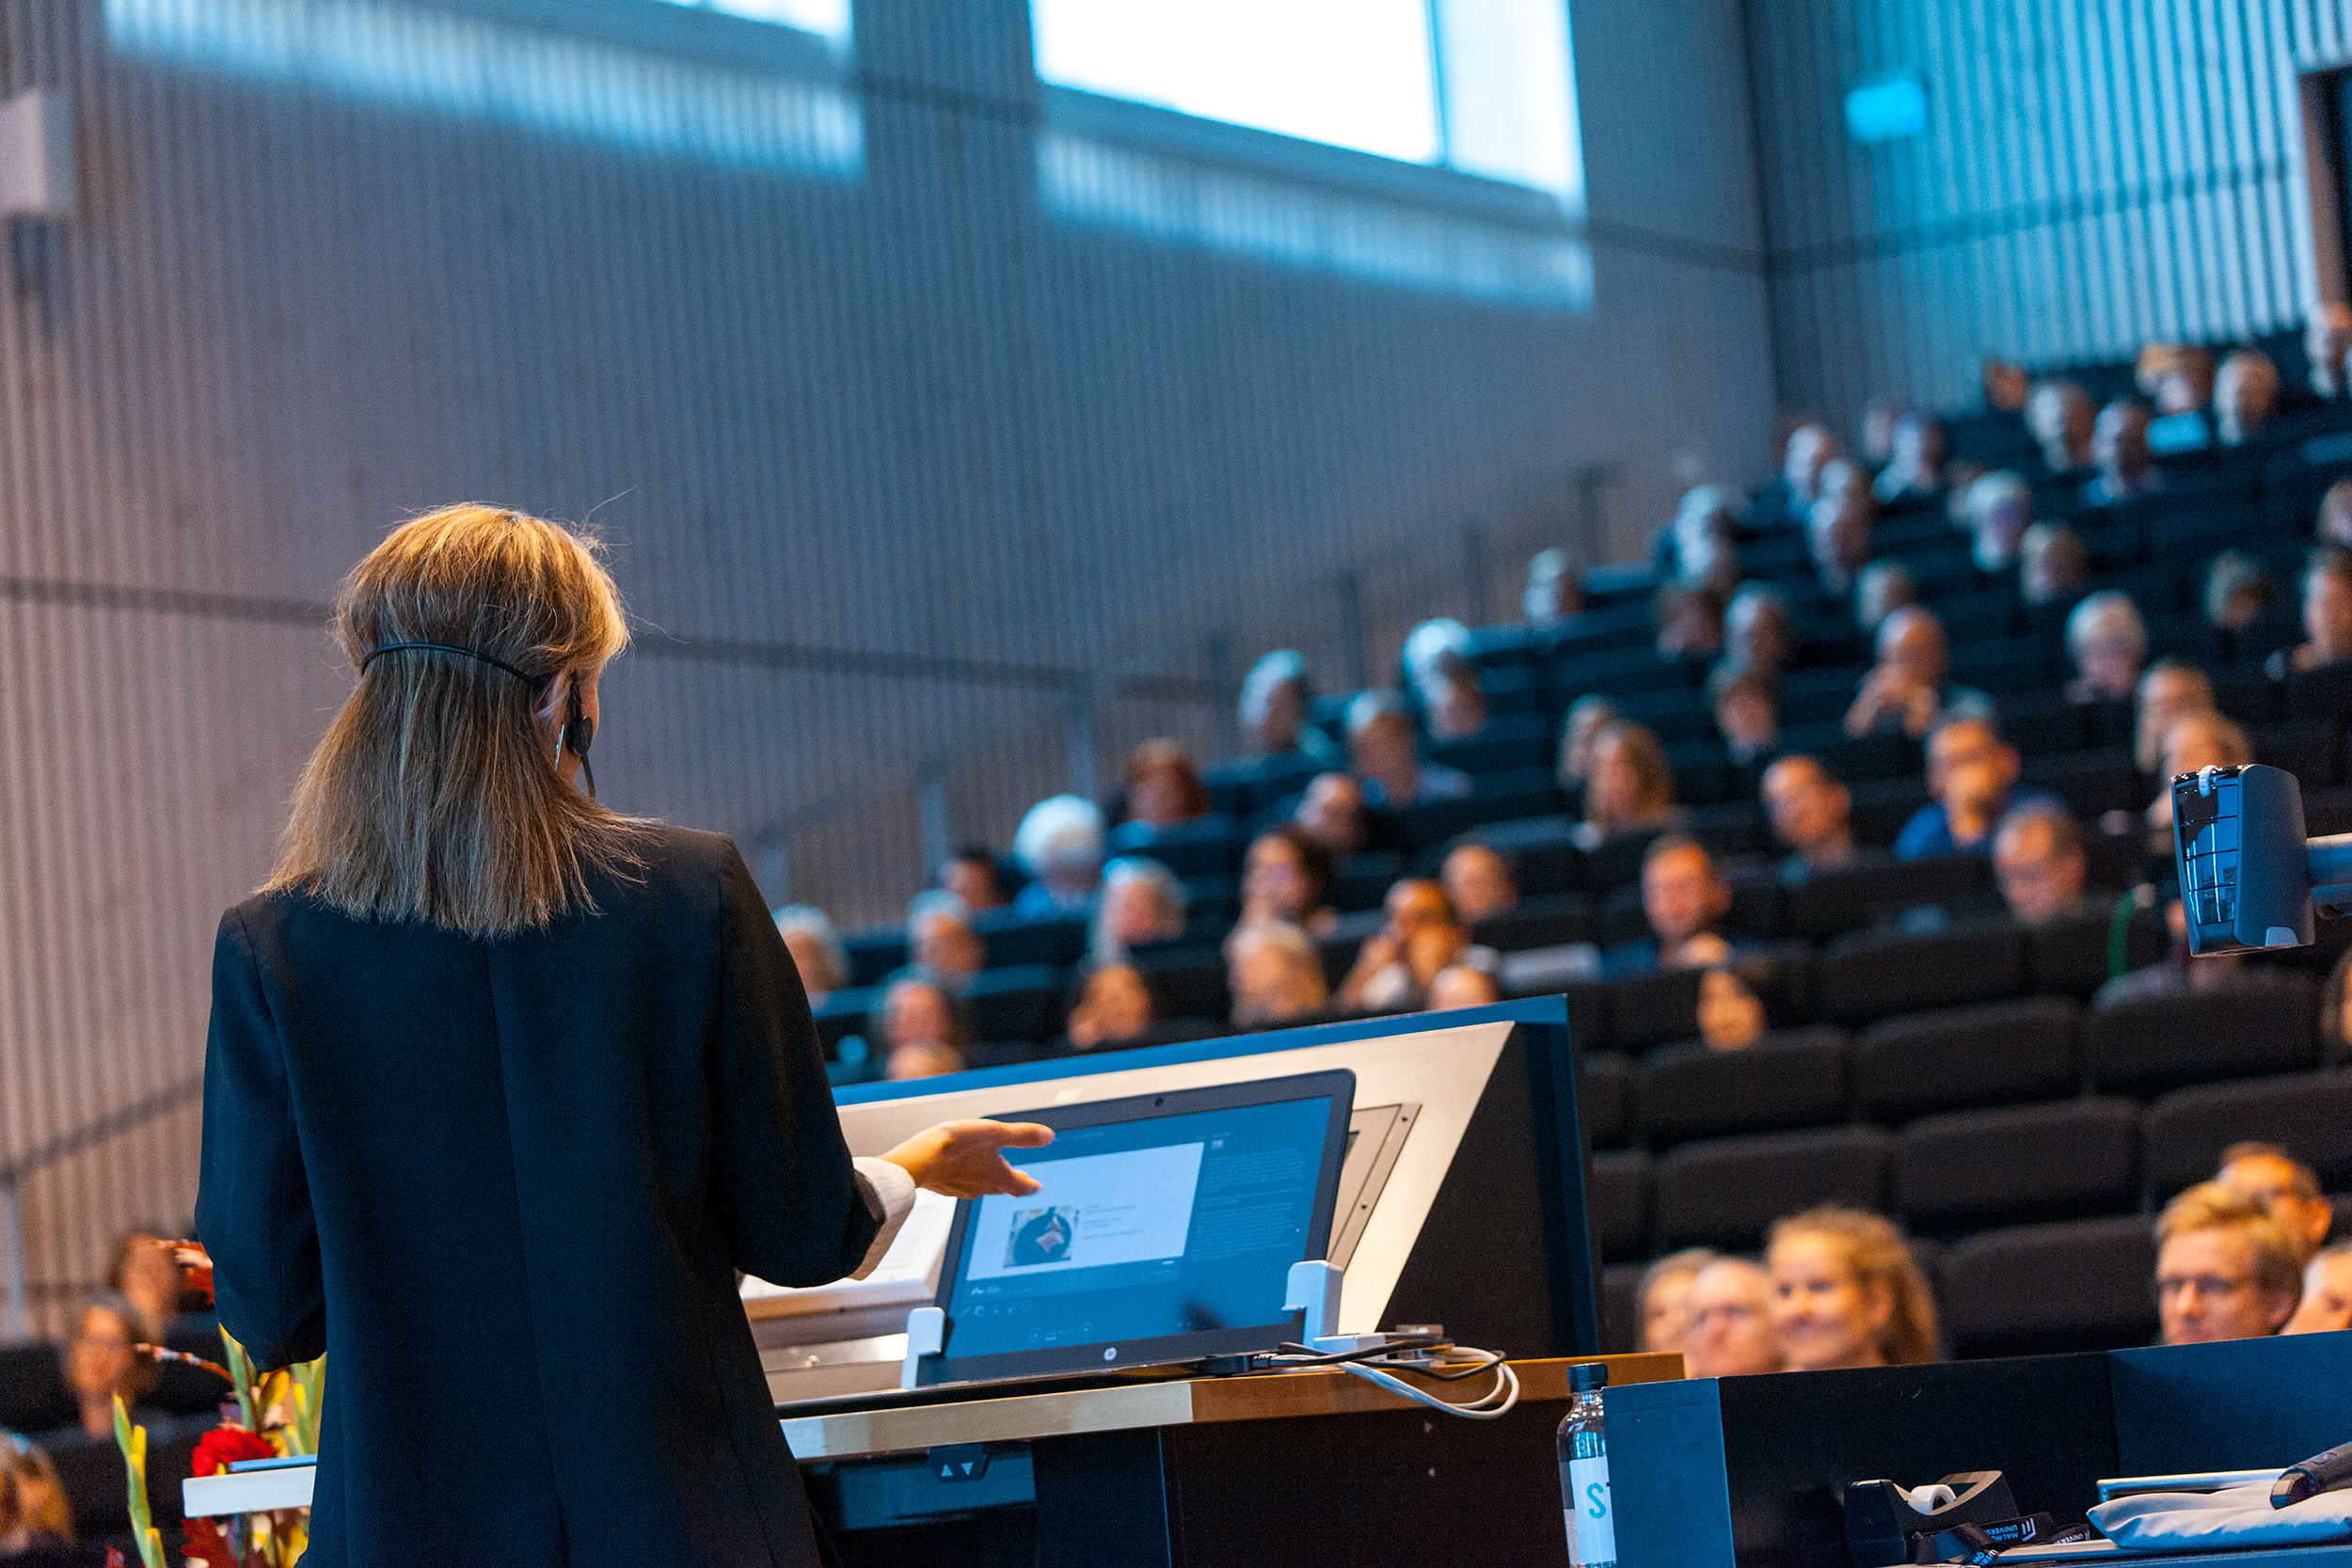 A woman standing in front of an audience at the NordMedia conference 2019.